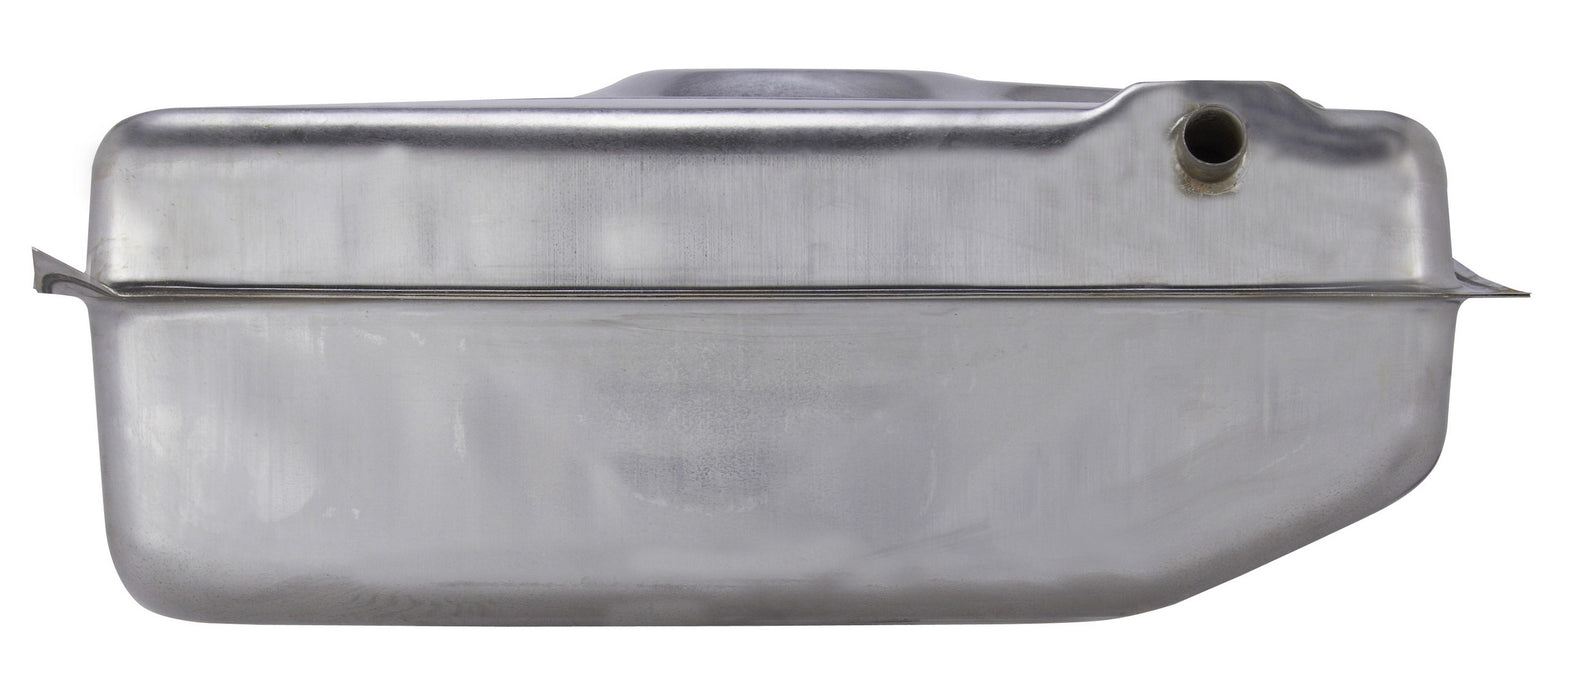 Fuel Tank for GMC G3500 1982 1981 1980 1979 - Spectra GM26A